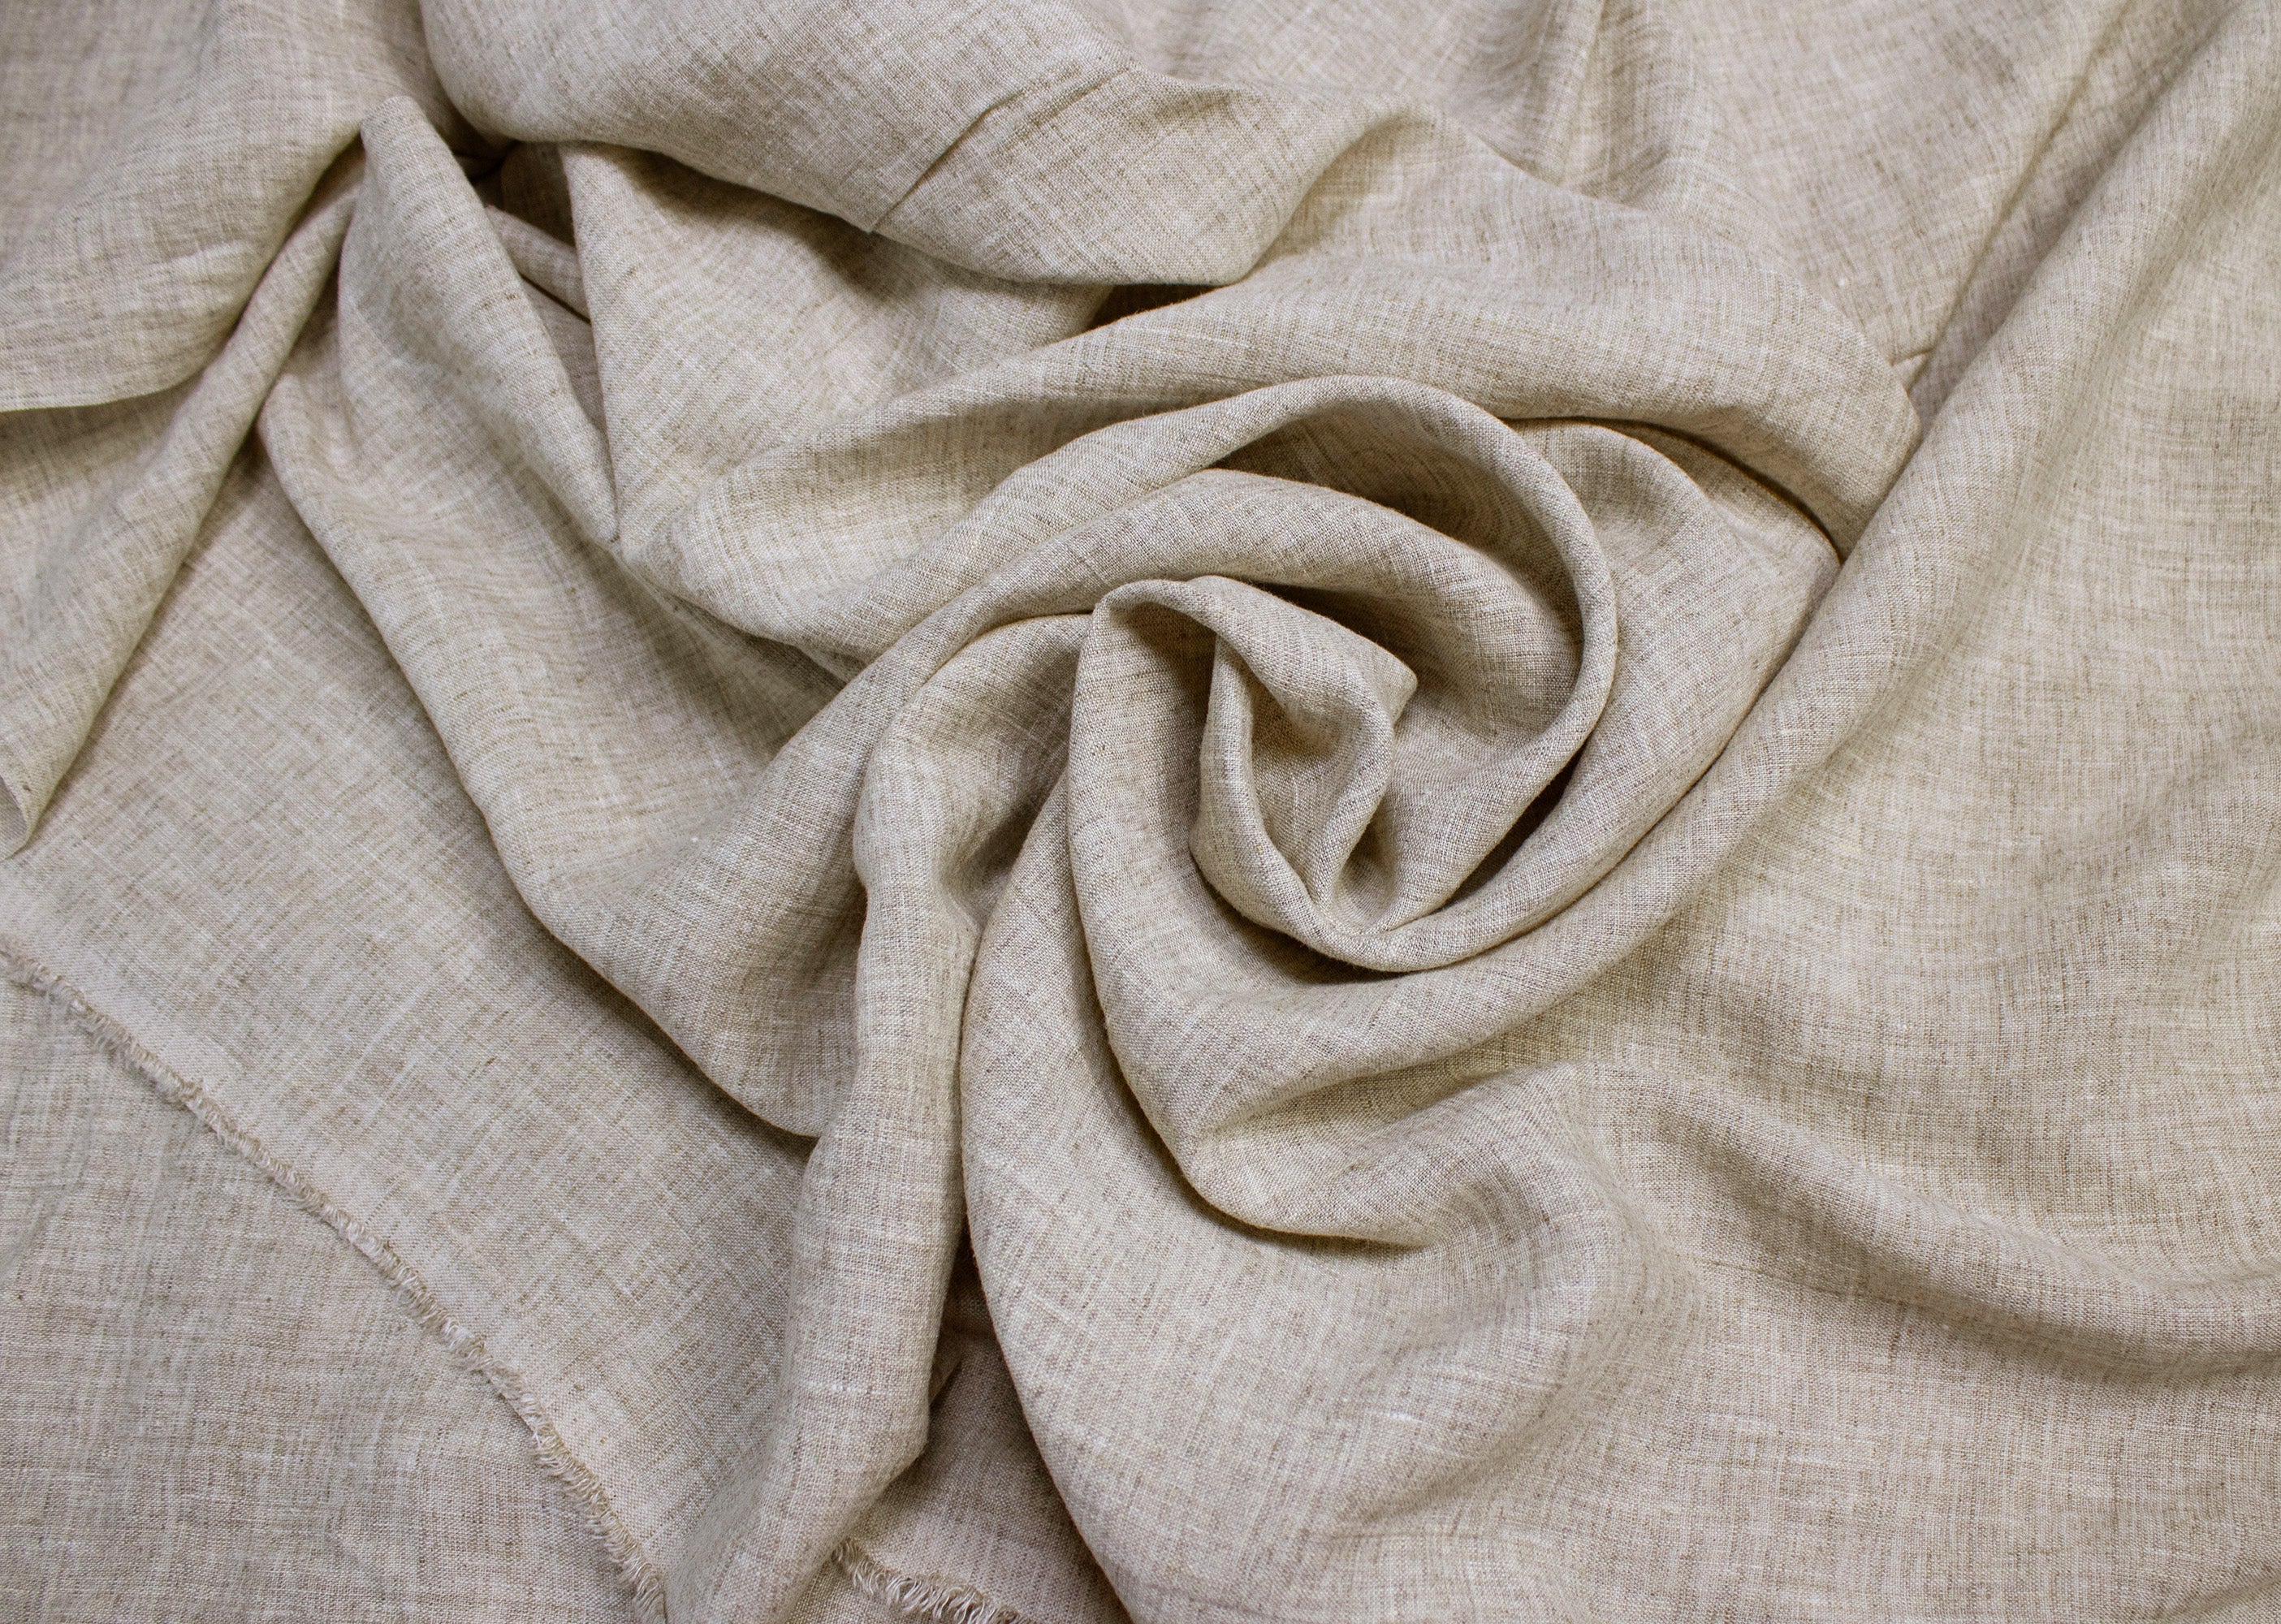 Luca-S Natural Pure Linen Wrinkled Fabric Rustic Color